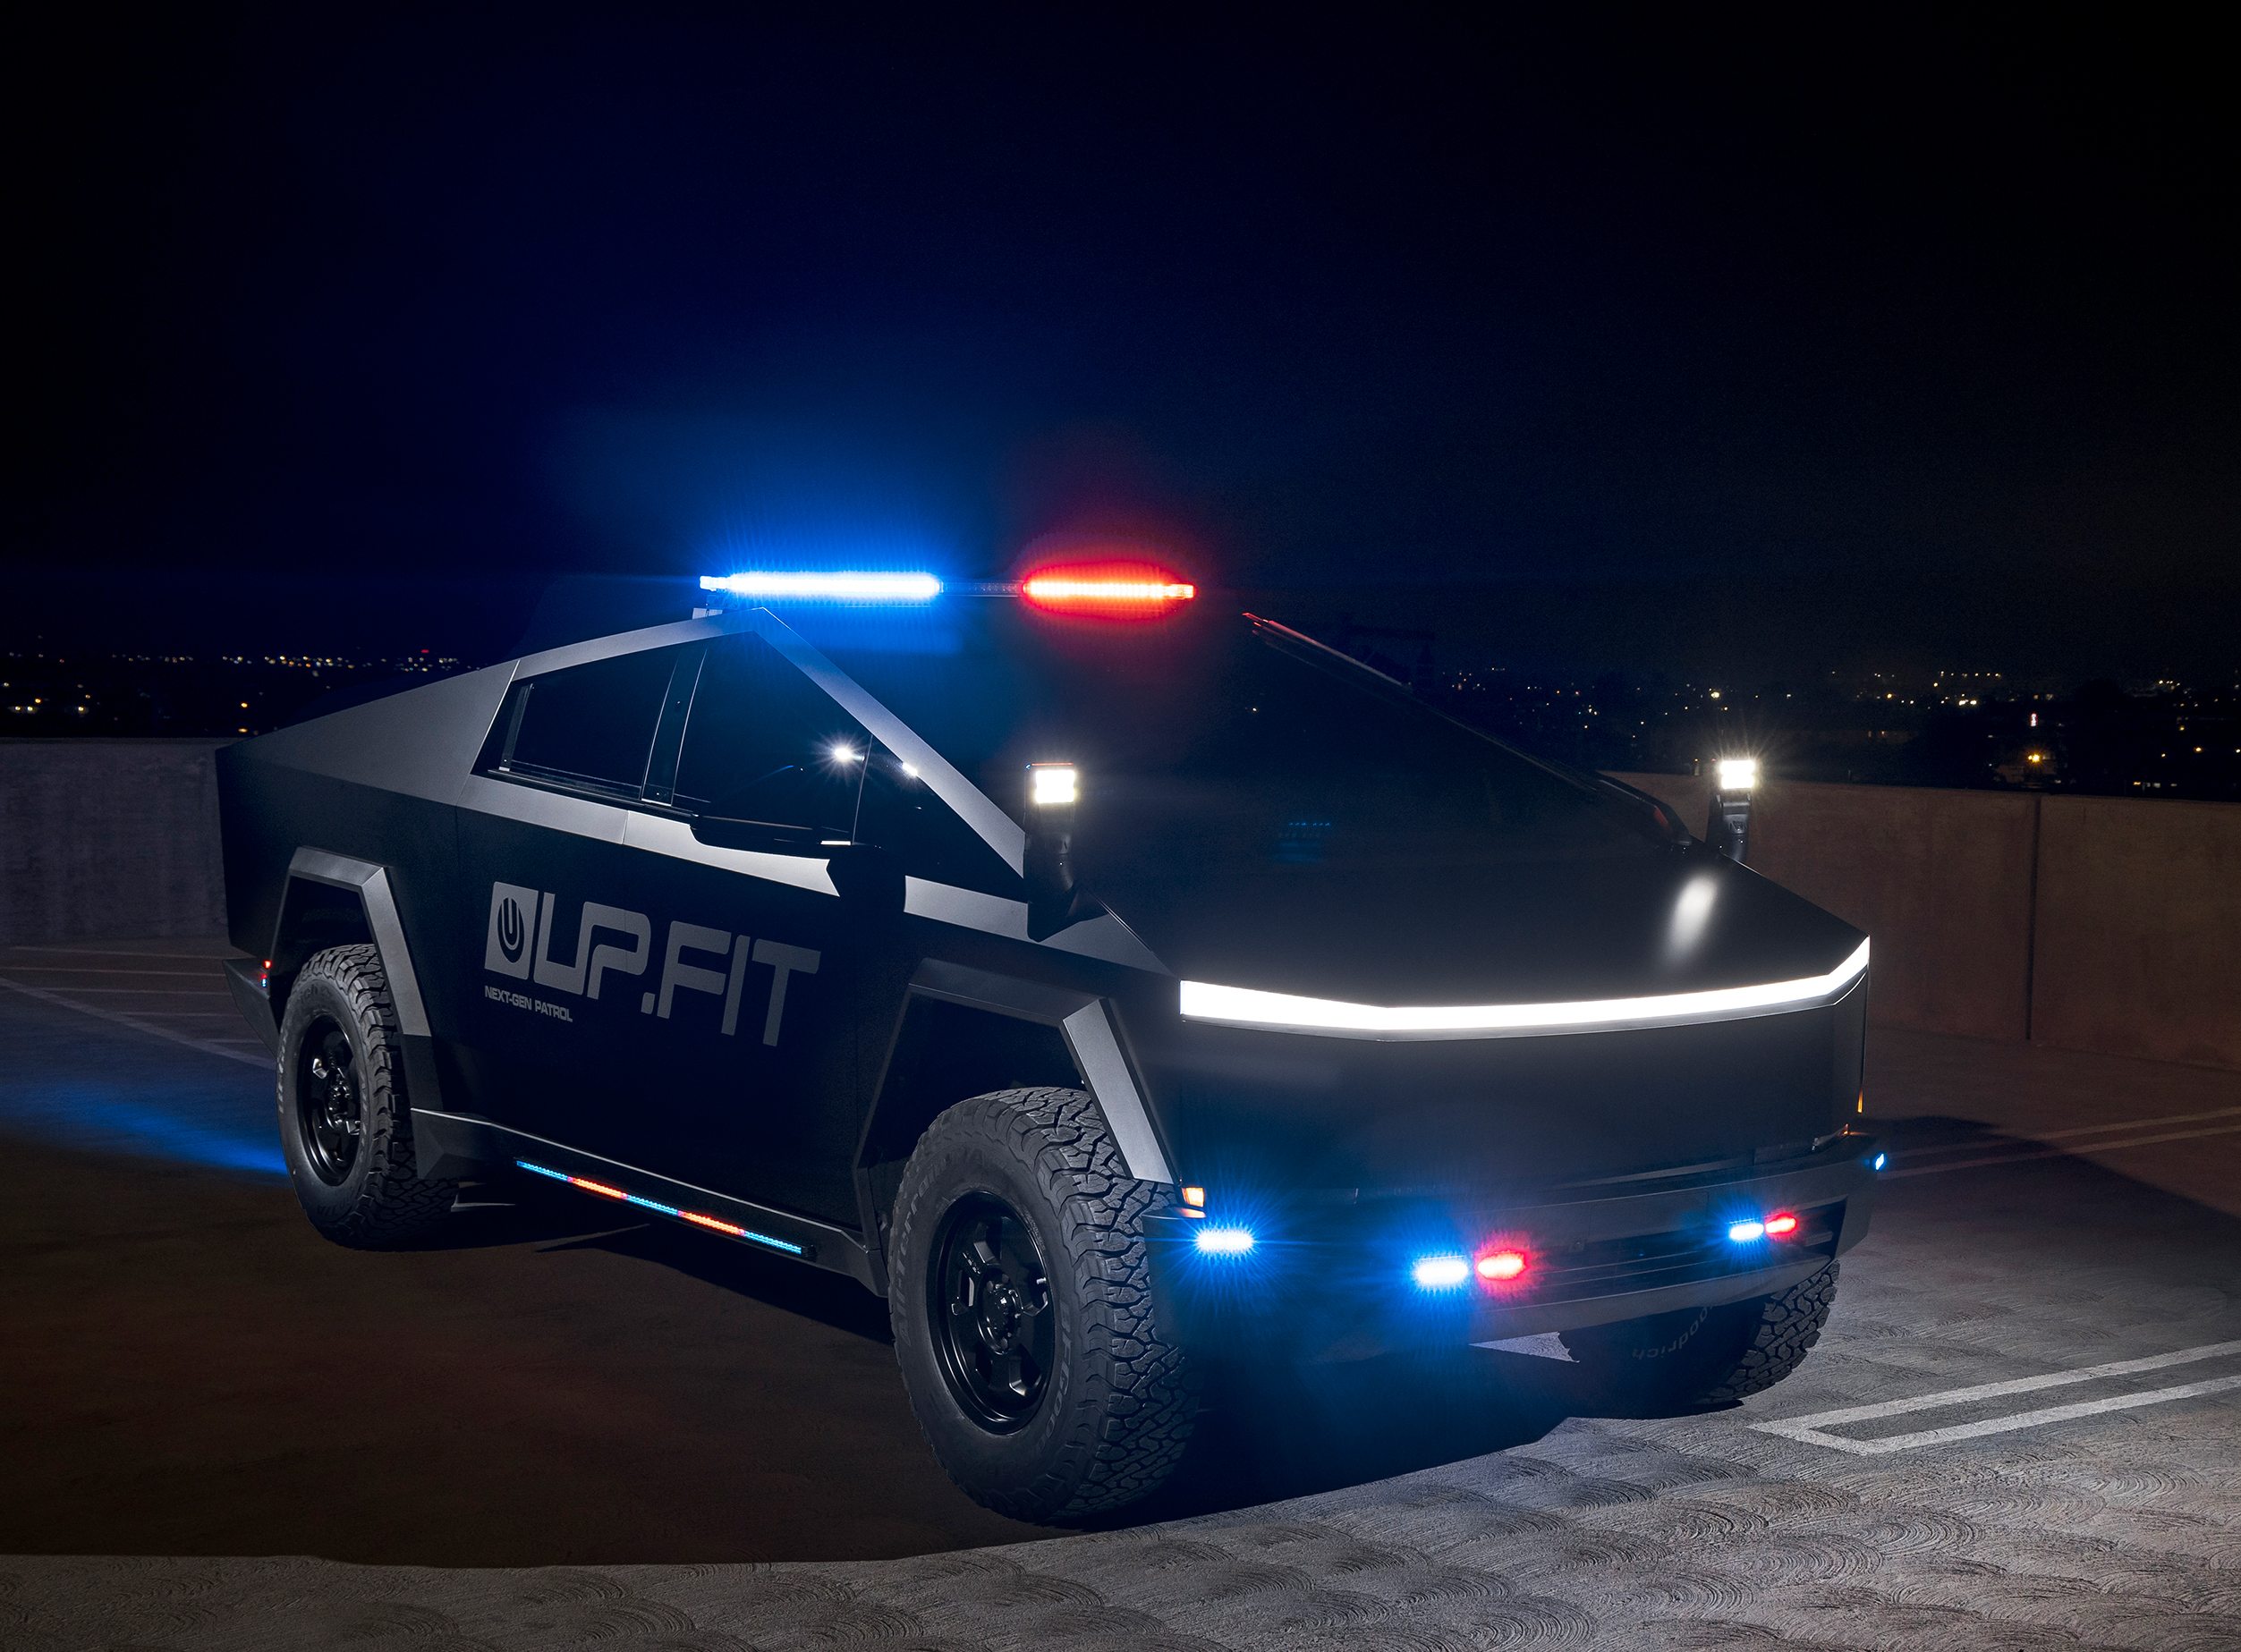 UP.FIT Unplugged Performance Tesla Cybertruck Police car Vehicle 1